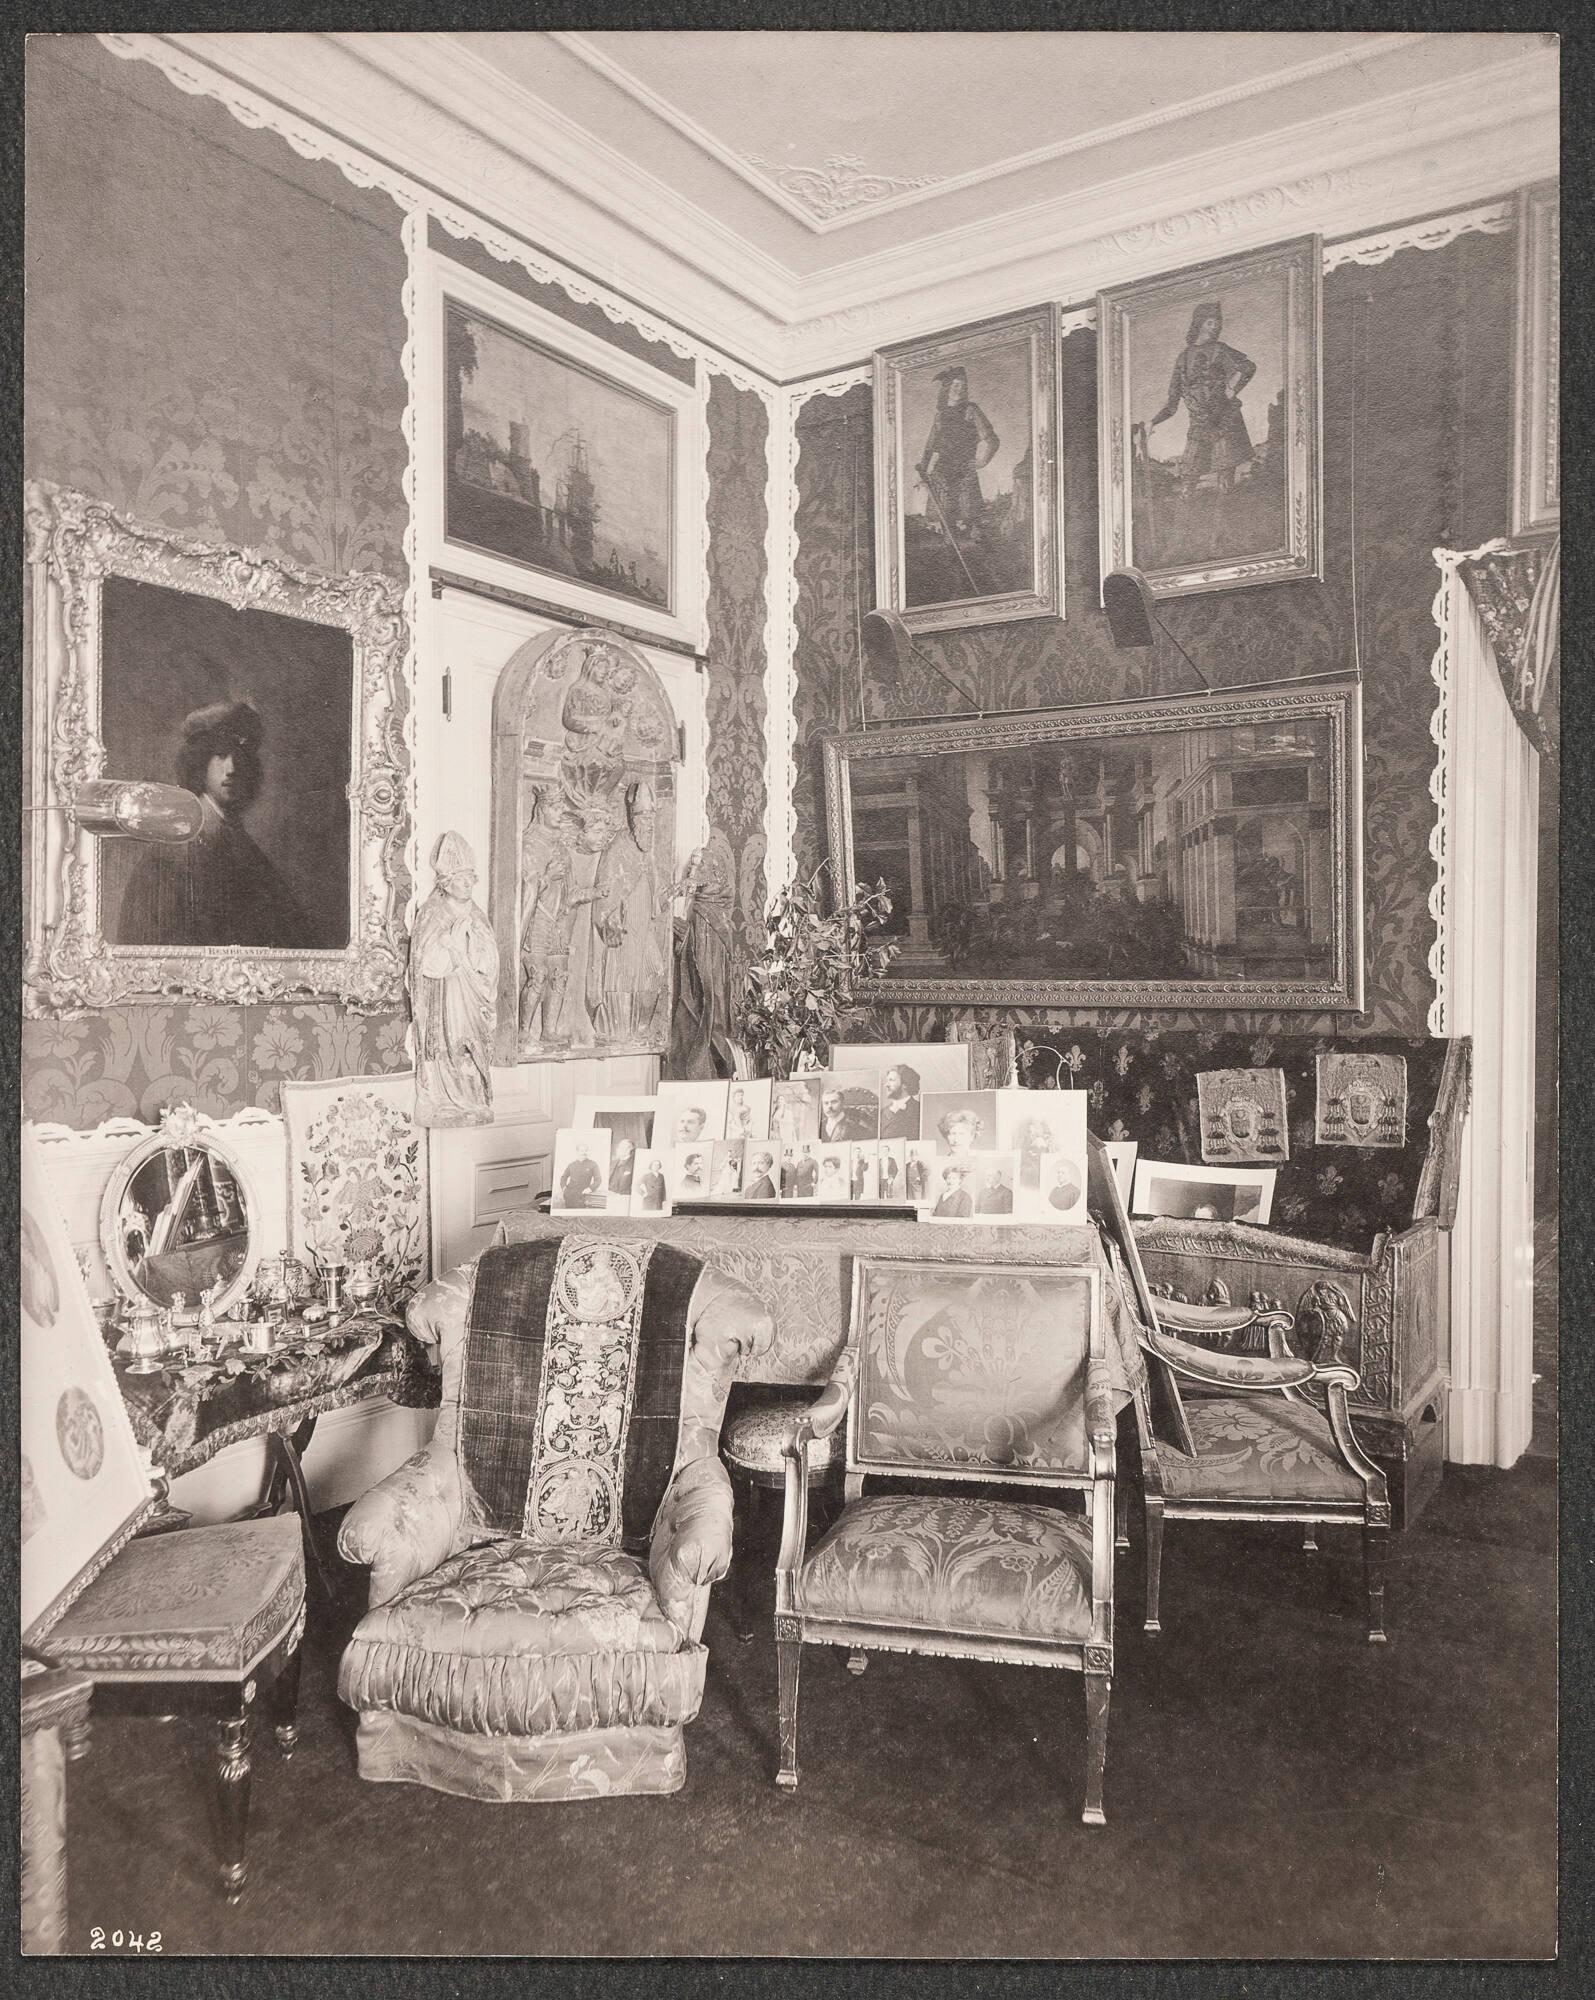 Opulent 19th century domestic interior of Isabella Stewart Gardner’s home crowded with paintings, furniture and decorative arts. Paintings are hung on the damask upholstered walls, chairs surround a table decorated with photographs of musicians. Framed works rest on the seats of empty chairs.